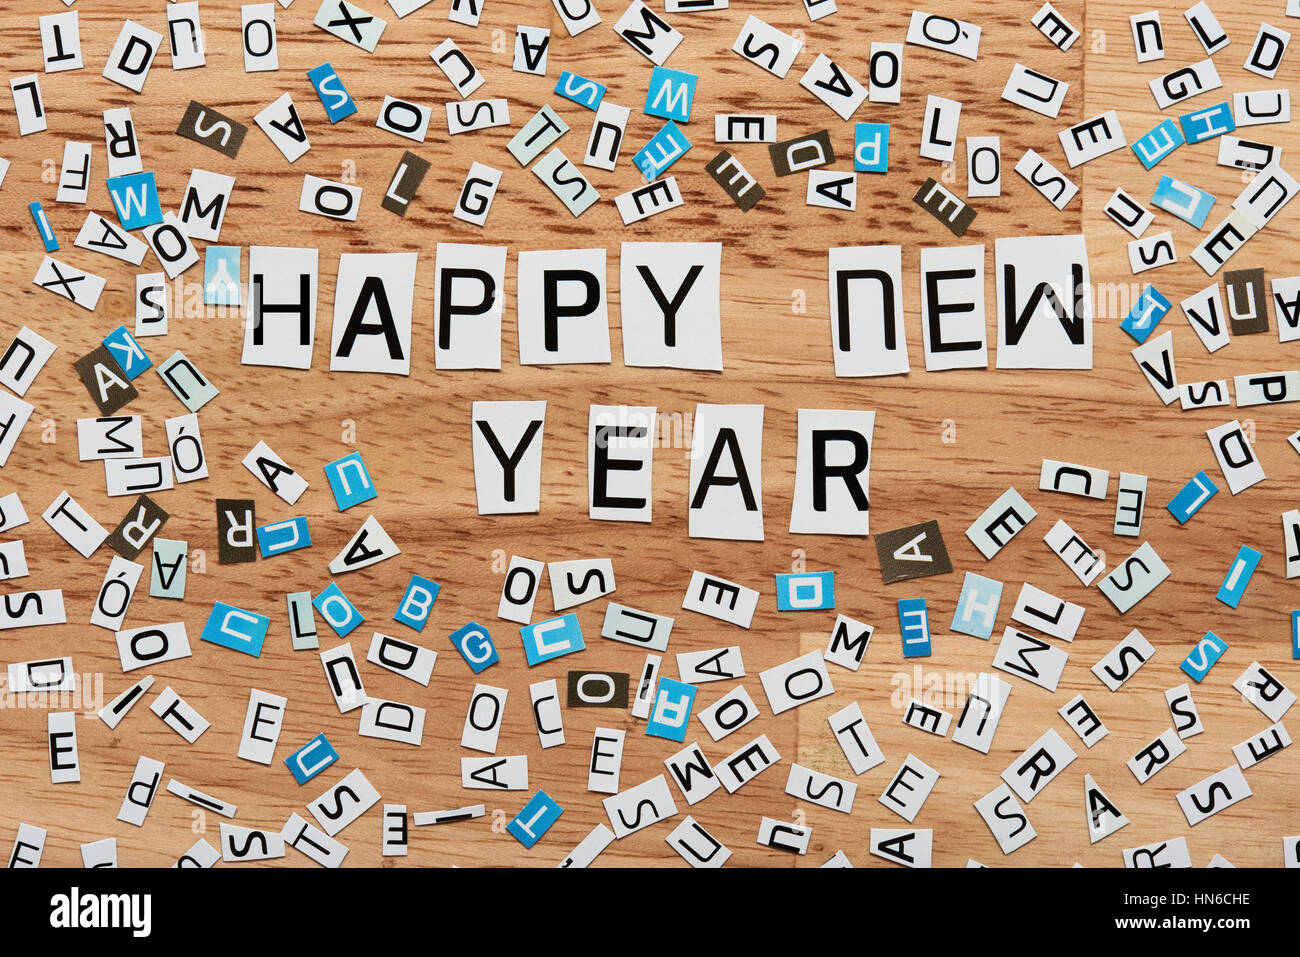 happy new year word cut out from magazine on wood Stock Photo